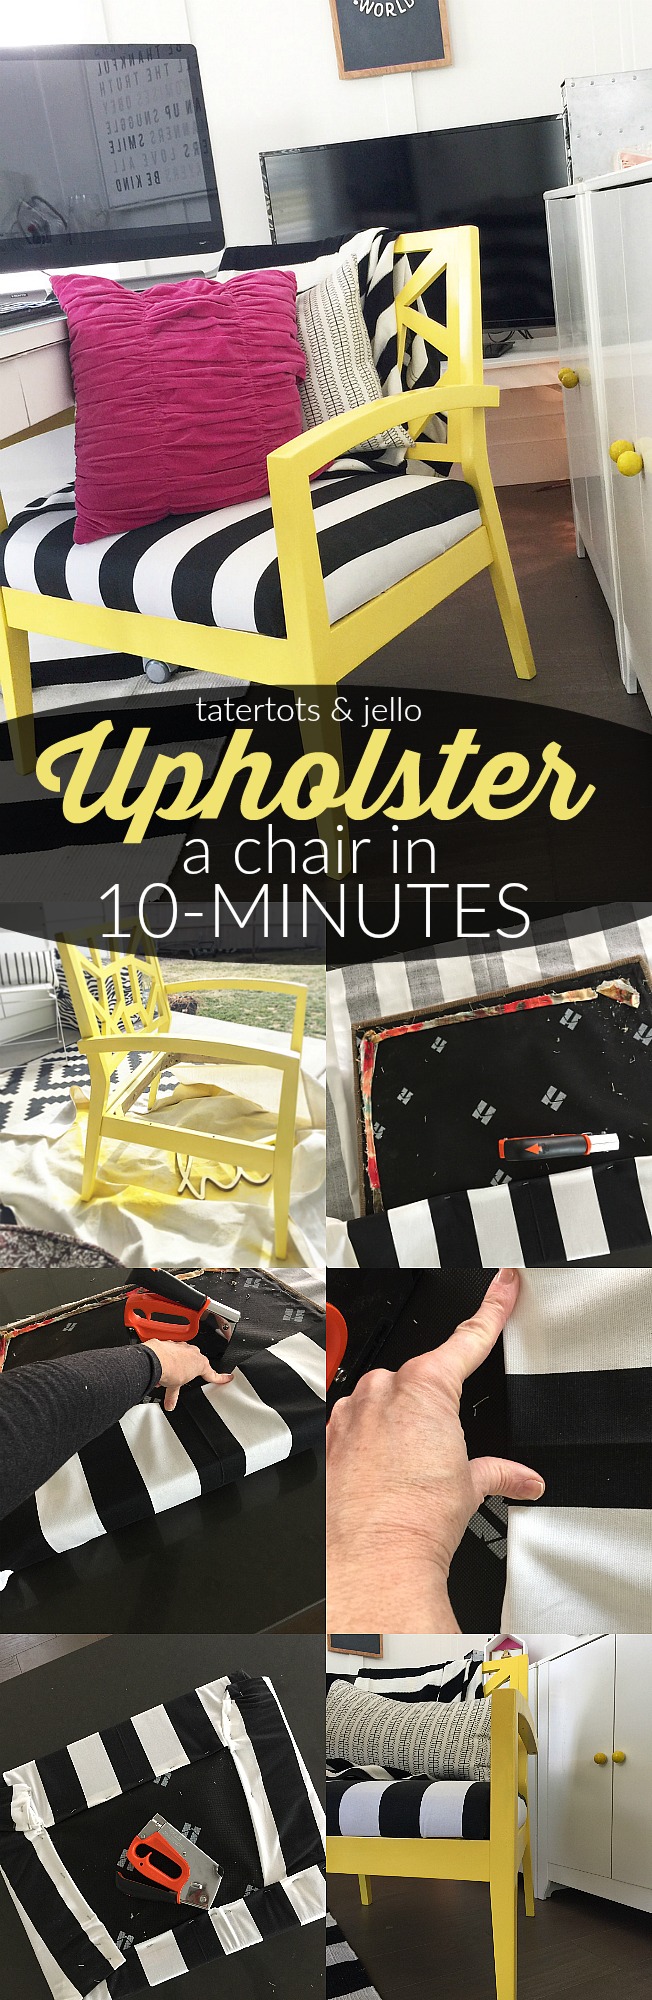 How to upholster a chair in 10 minutes. 5 easy steps! 